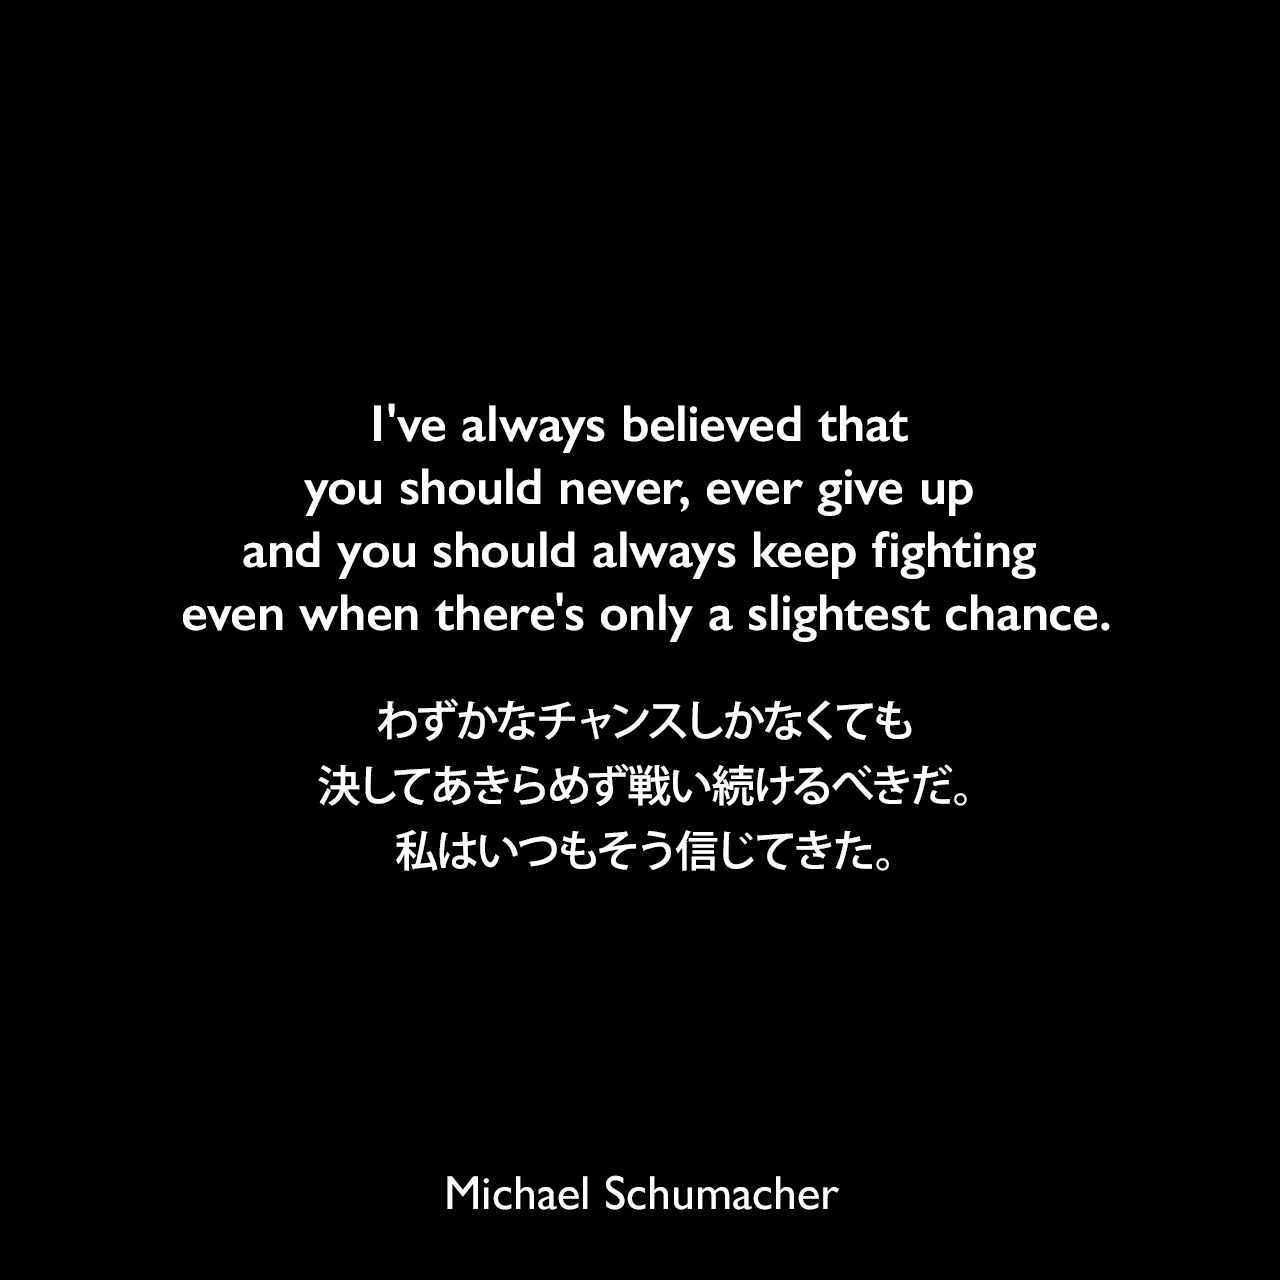 I've always believed that you should never, ever give up and you should always keep fighting even when there's only a slightest chance.わずかなチャンスしかなくても、決してあきらめず戦い続けるべきだ。私はいつもそう信じてきた。Michael Schumacher